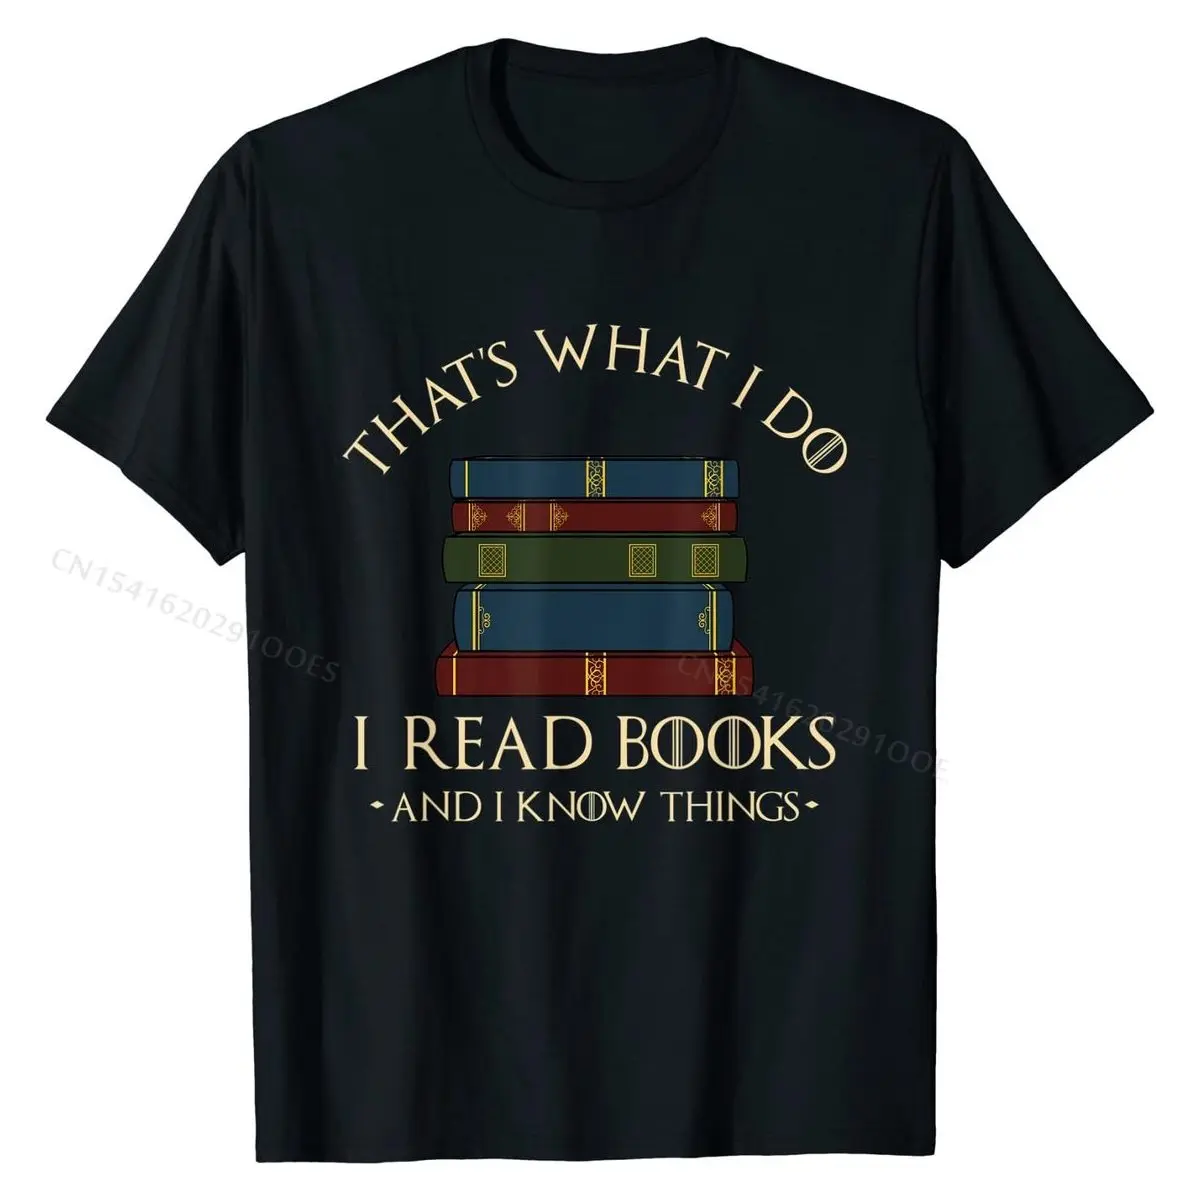 

That's What I Do I Read Books And I Know Things - Reading T-Shirt Hot Sale Men Tshirts Casual Tops Tees Cotton Birthday